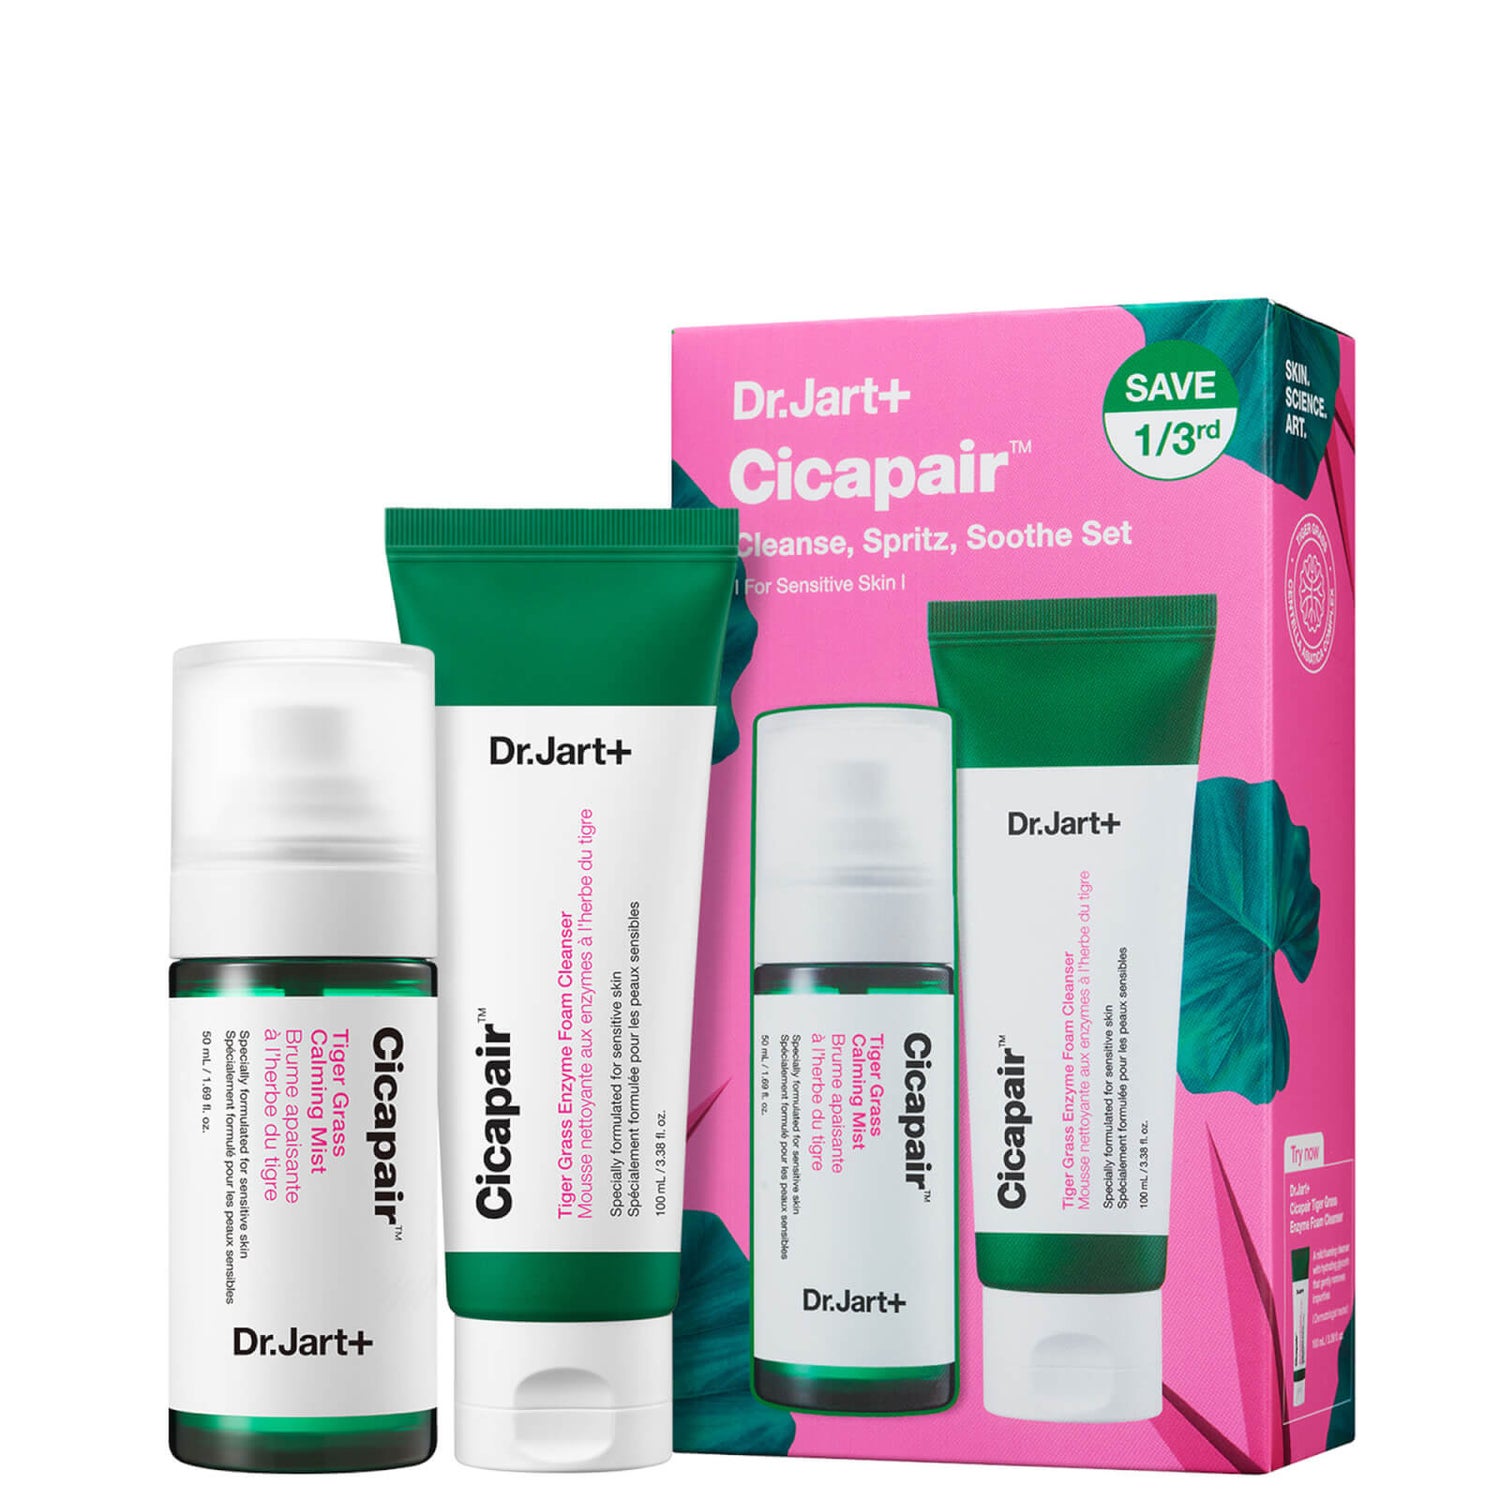 Dr.Jart+ Cicapair Cleanse, Spritz and Soothe Set